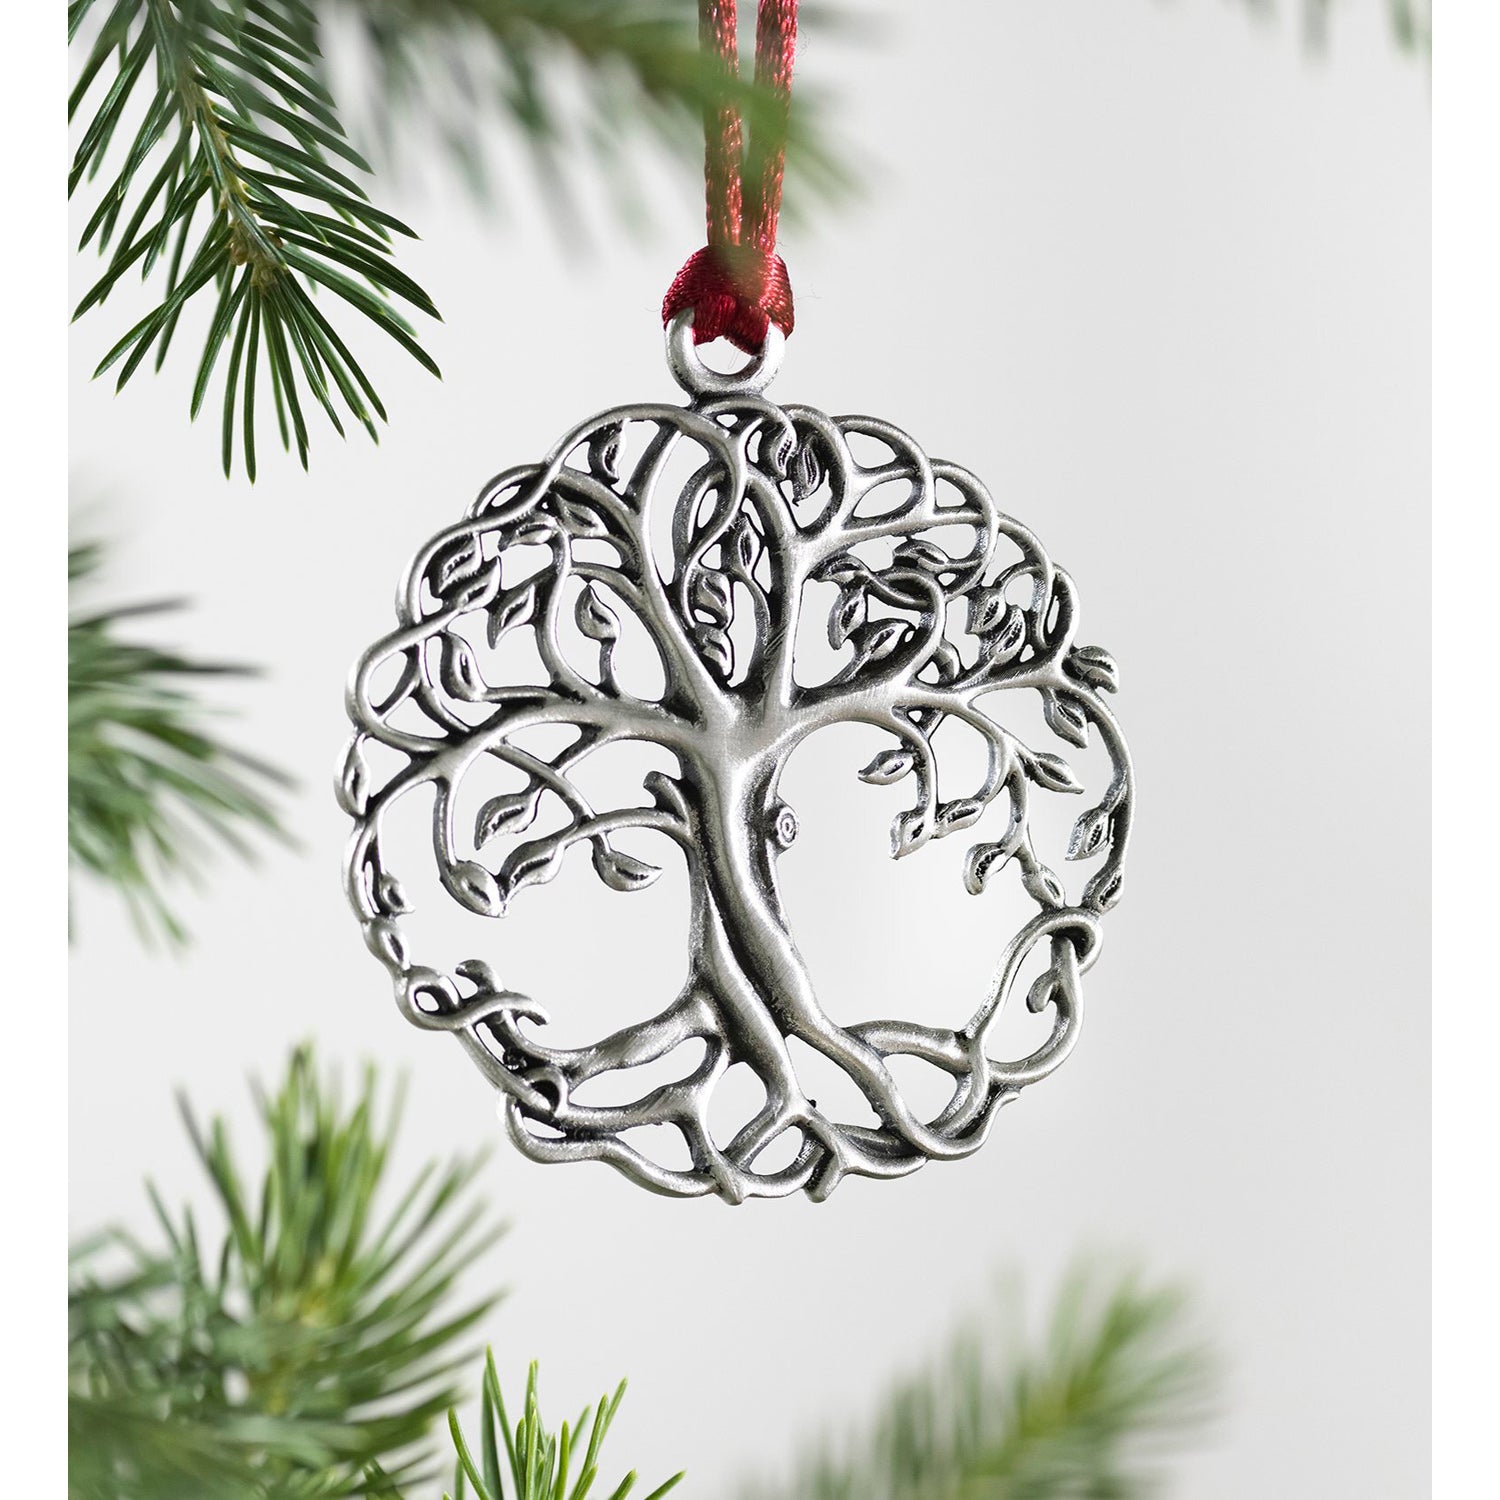 Pewter Tree of Life Ornament, Plow & Hearth